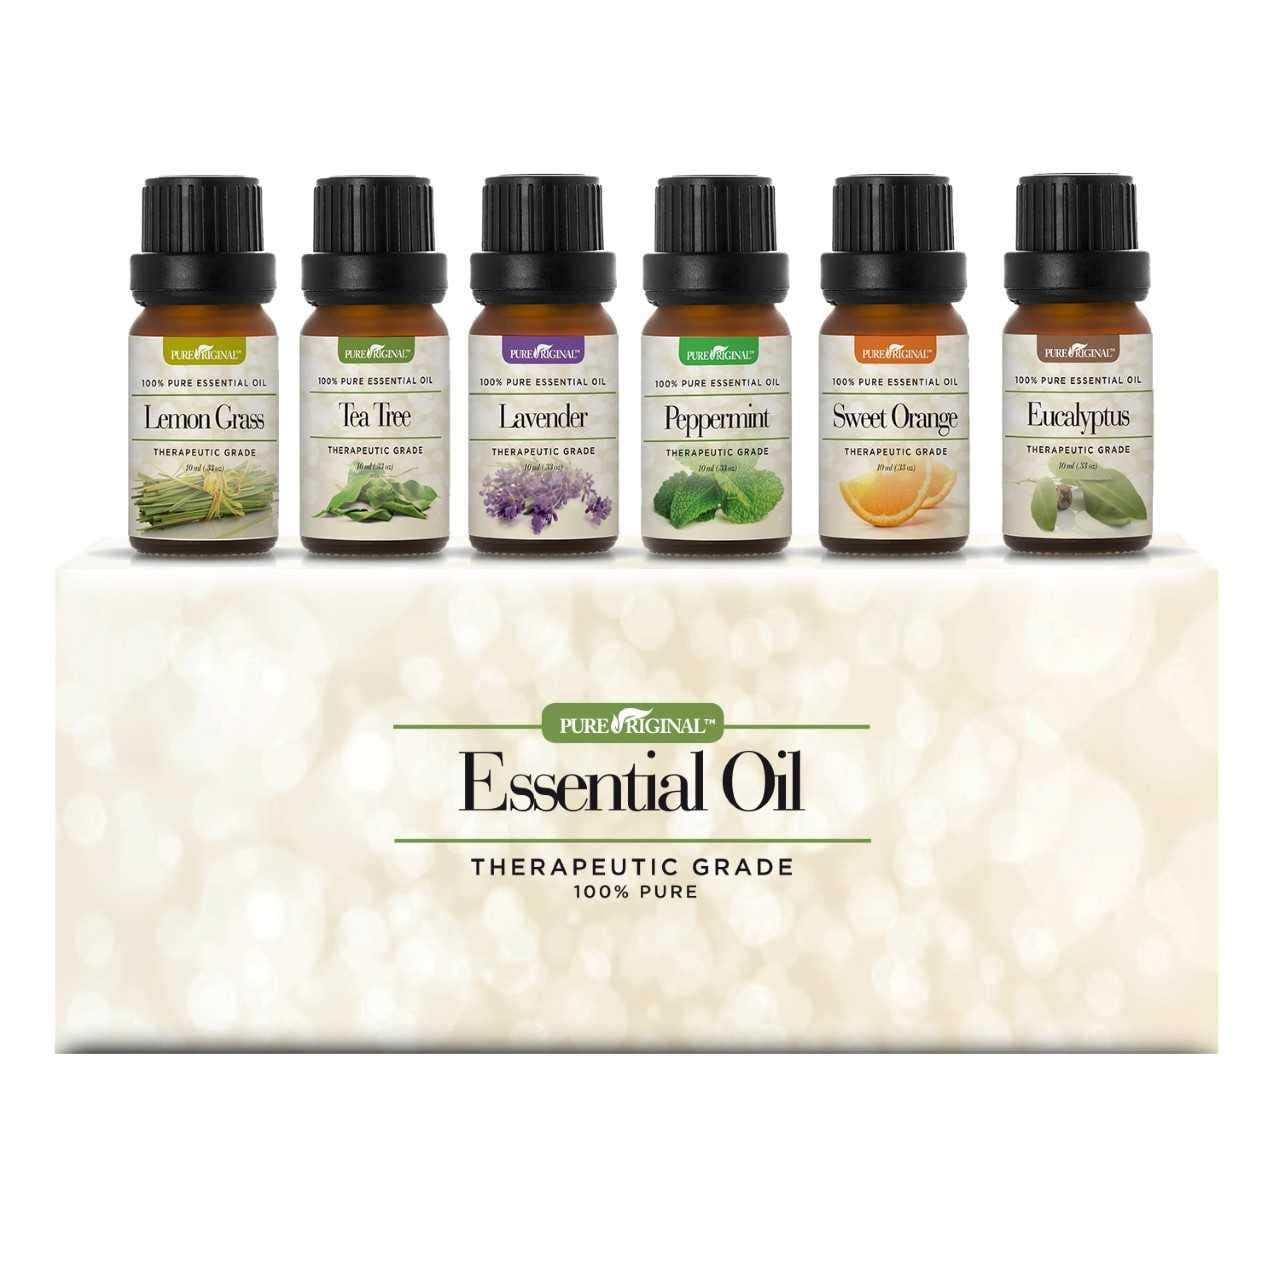 Scent of Adventure Essential Oils Set 6 Aromatherapy Diffuser Blends for  Home Office Humidifier Car Fresheners Premium Grade Relaxation Scented Oil